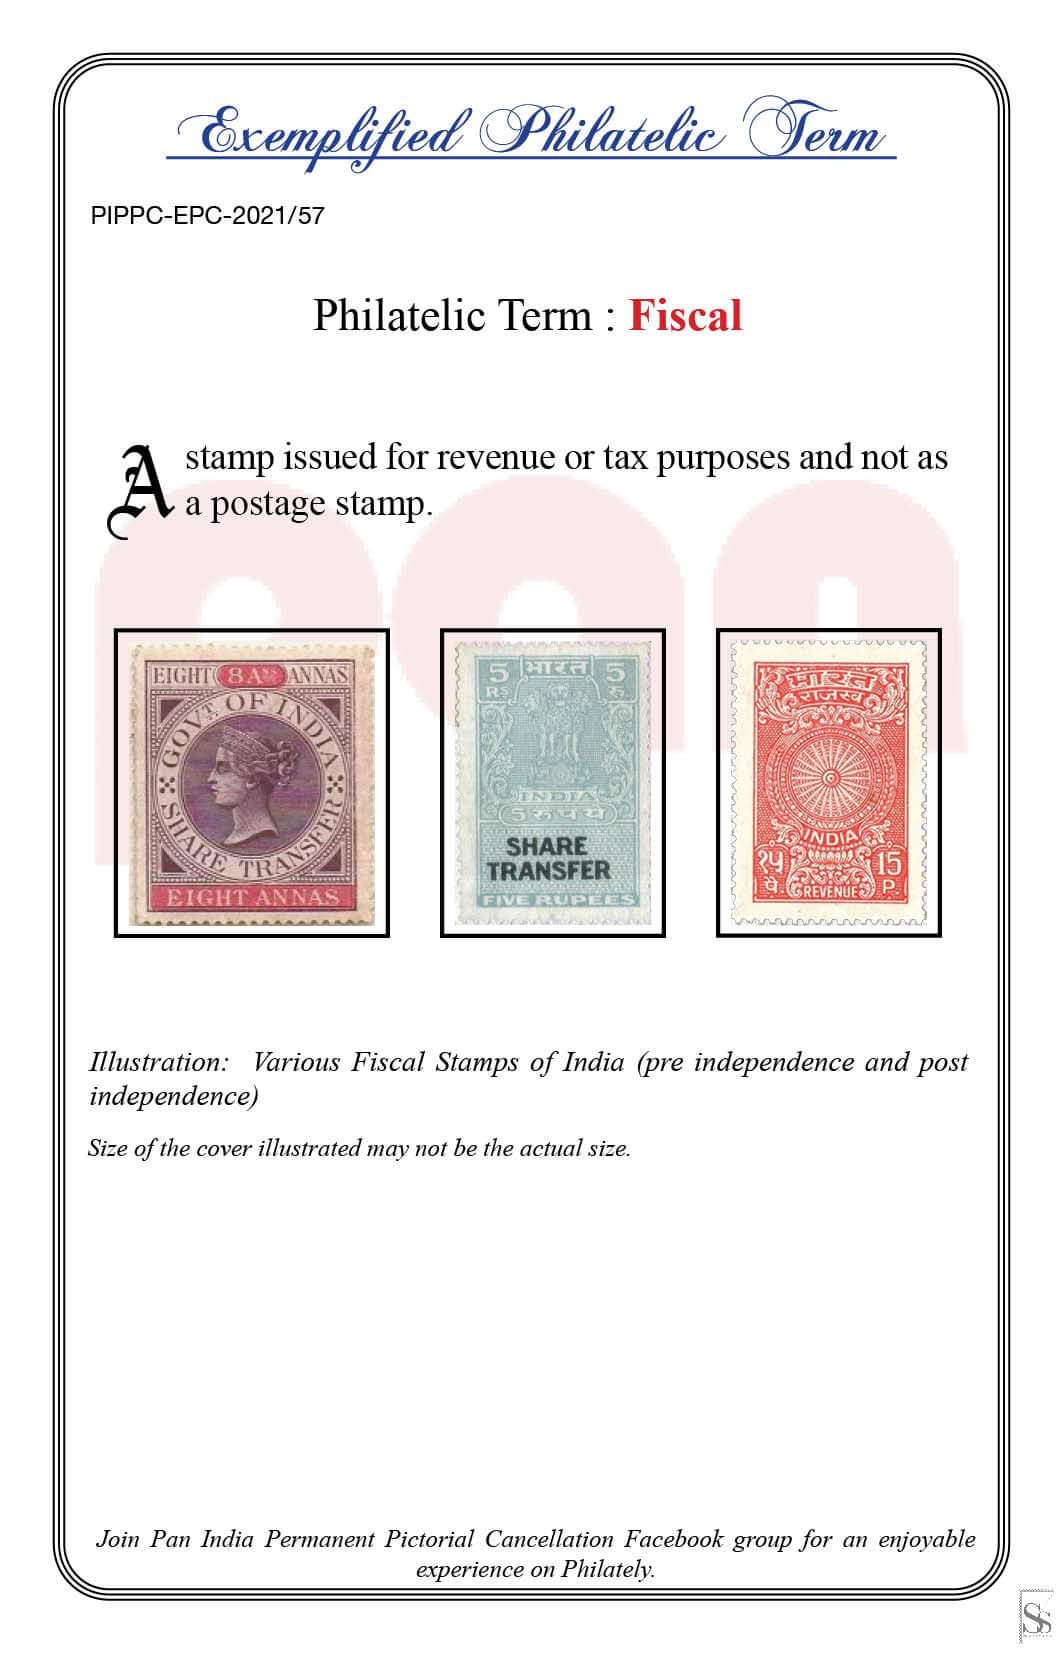 57. Today's Exemplified Philatelic term- Fiscal